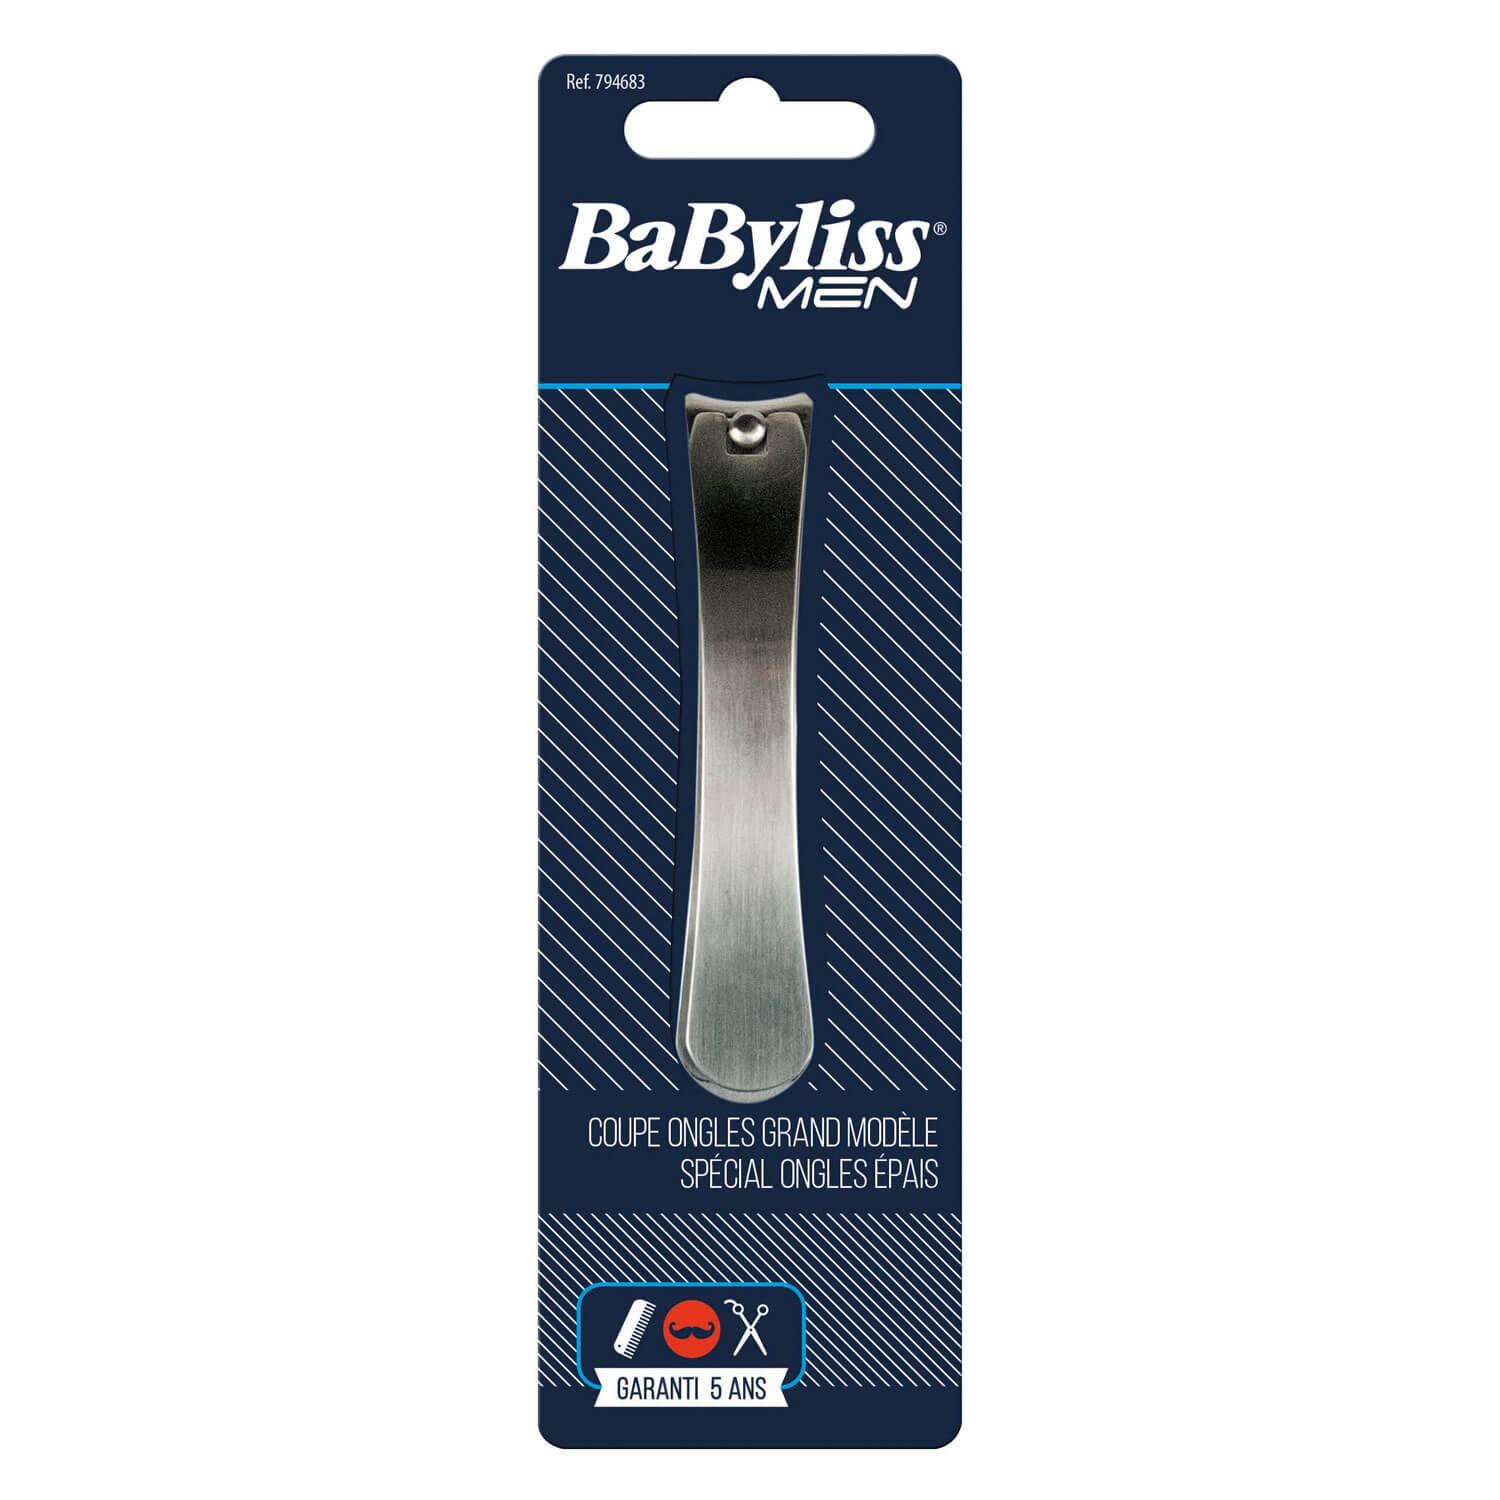 BaByliss MEN - Coupe Ongles Grand Modèle 794683